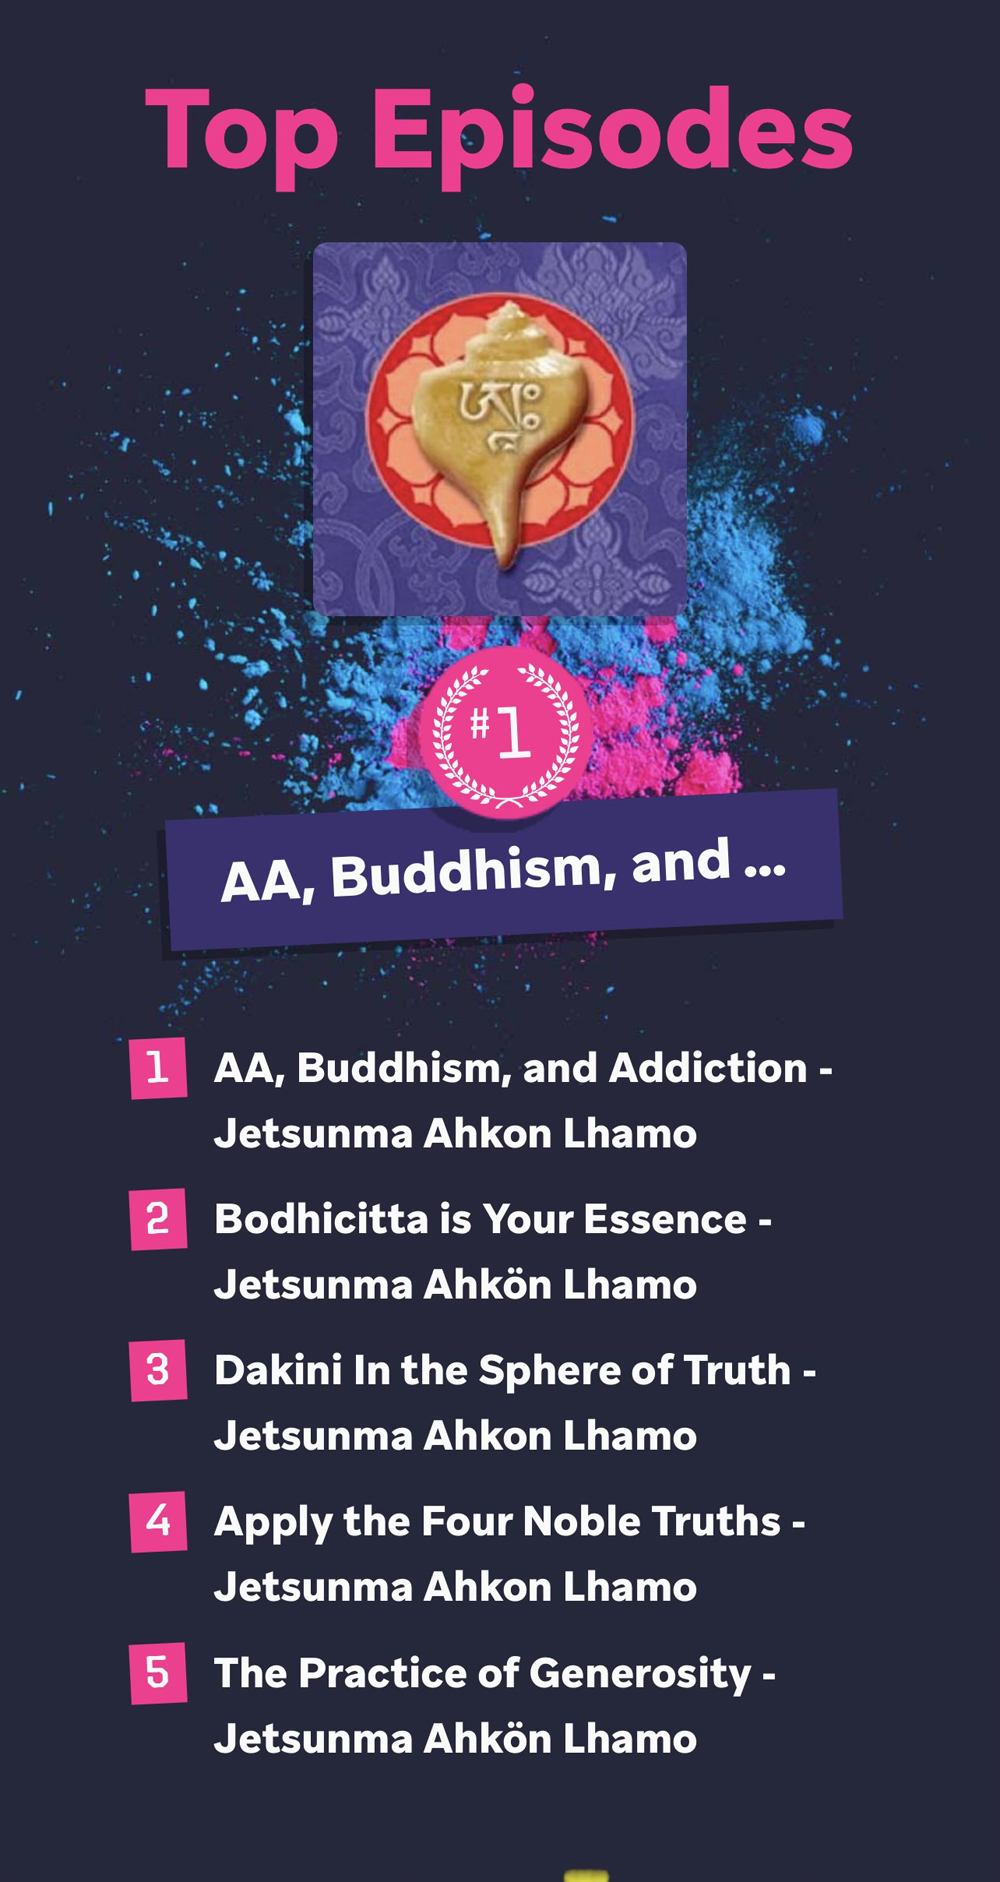 Buddhism podcast - top episodes